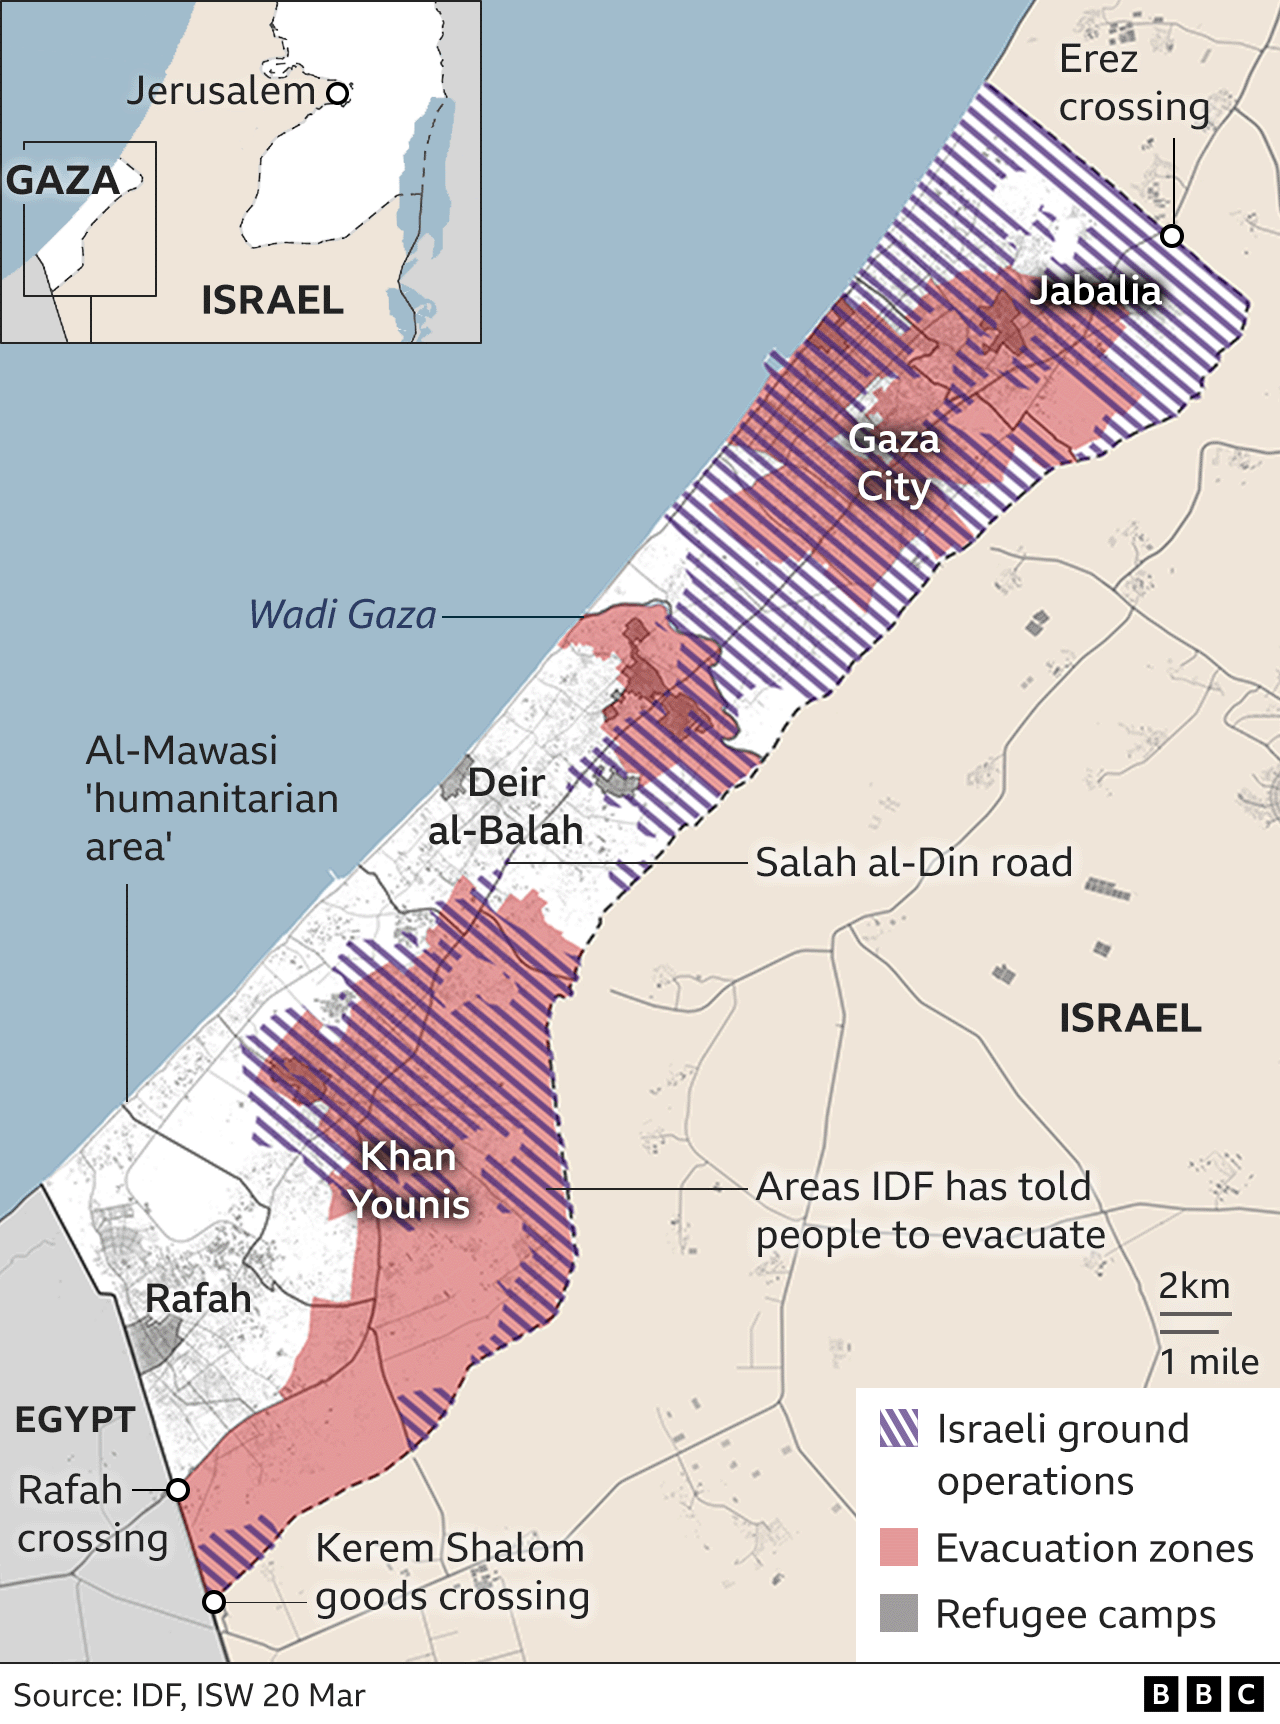 Map showing Israeli operations and evacuation areas